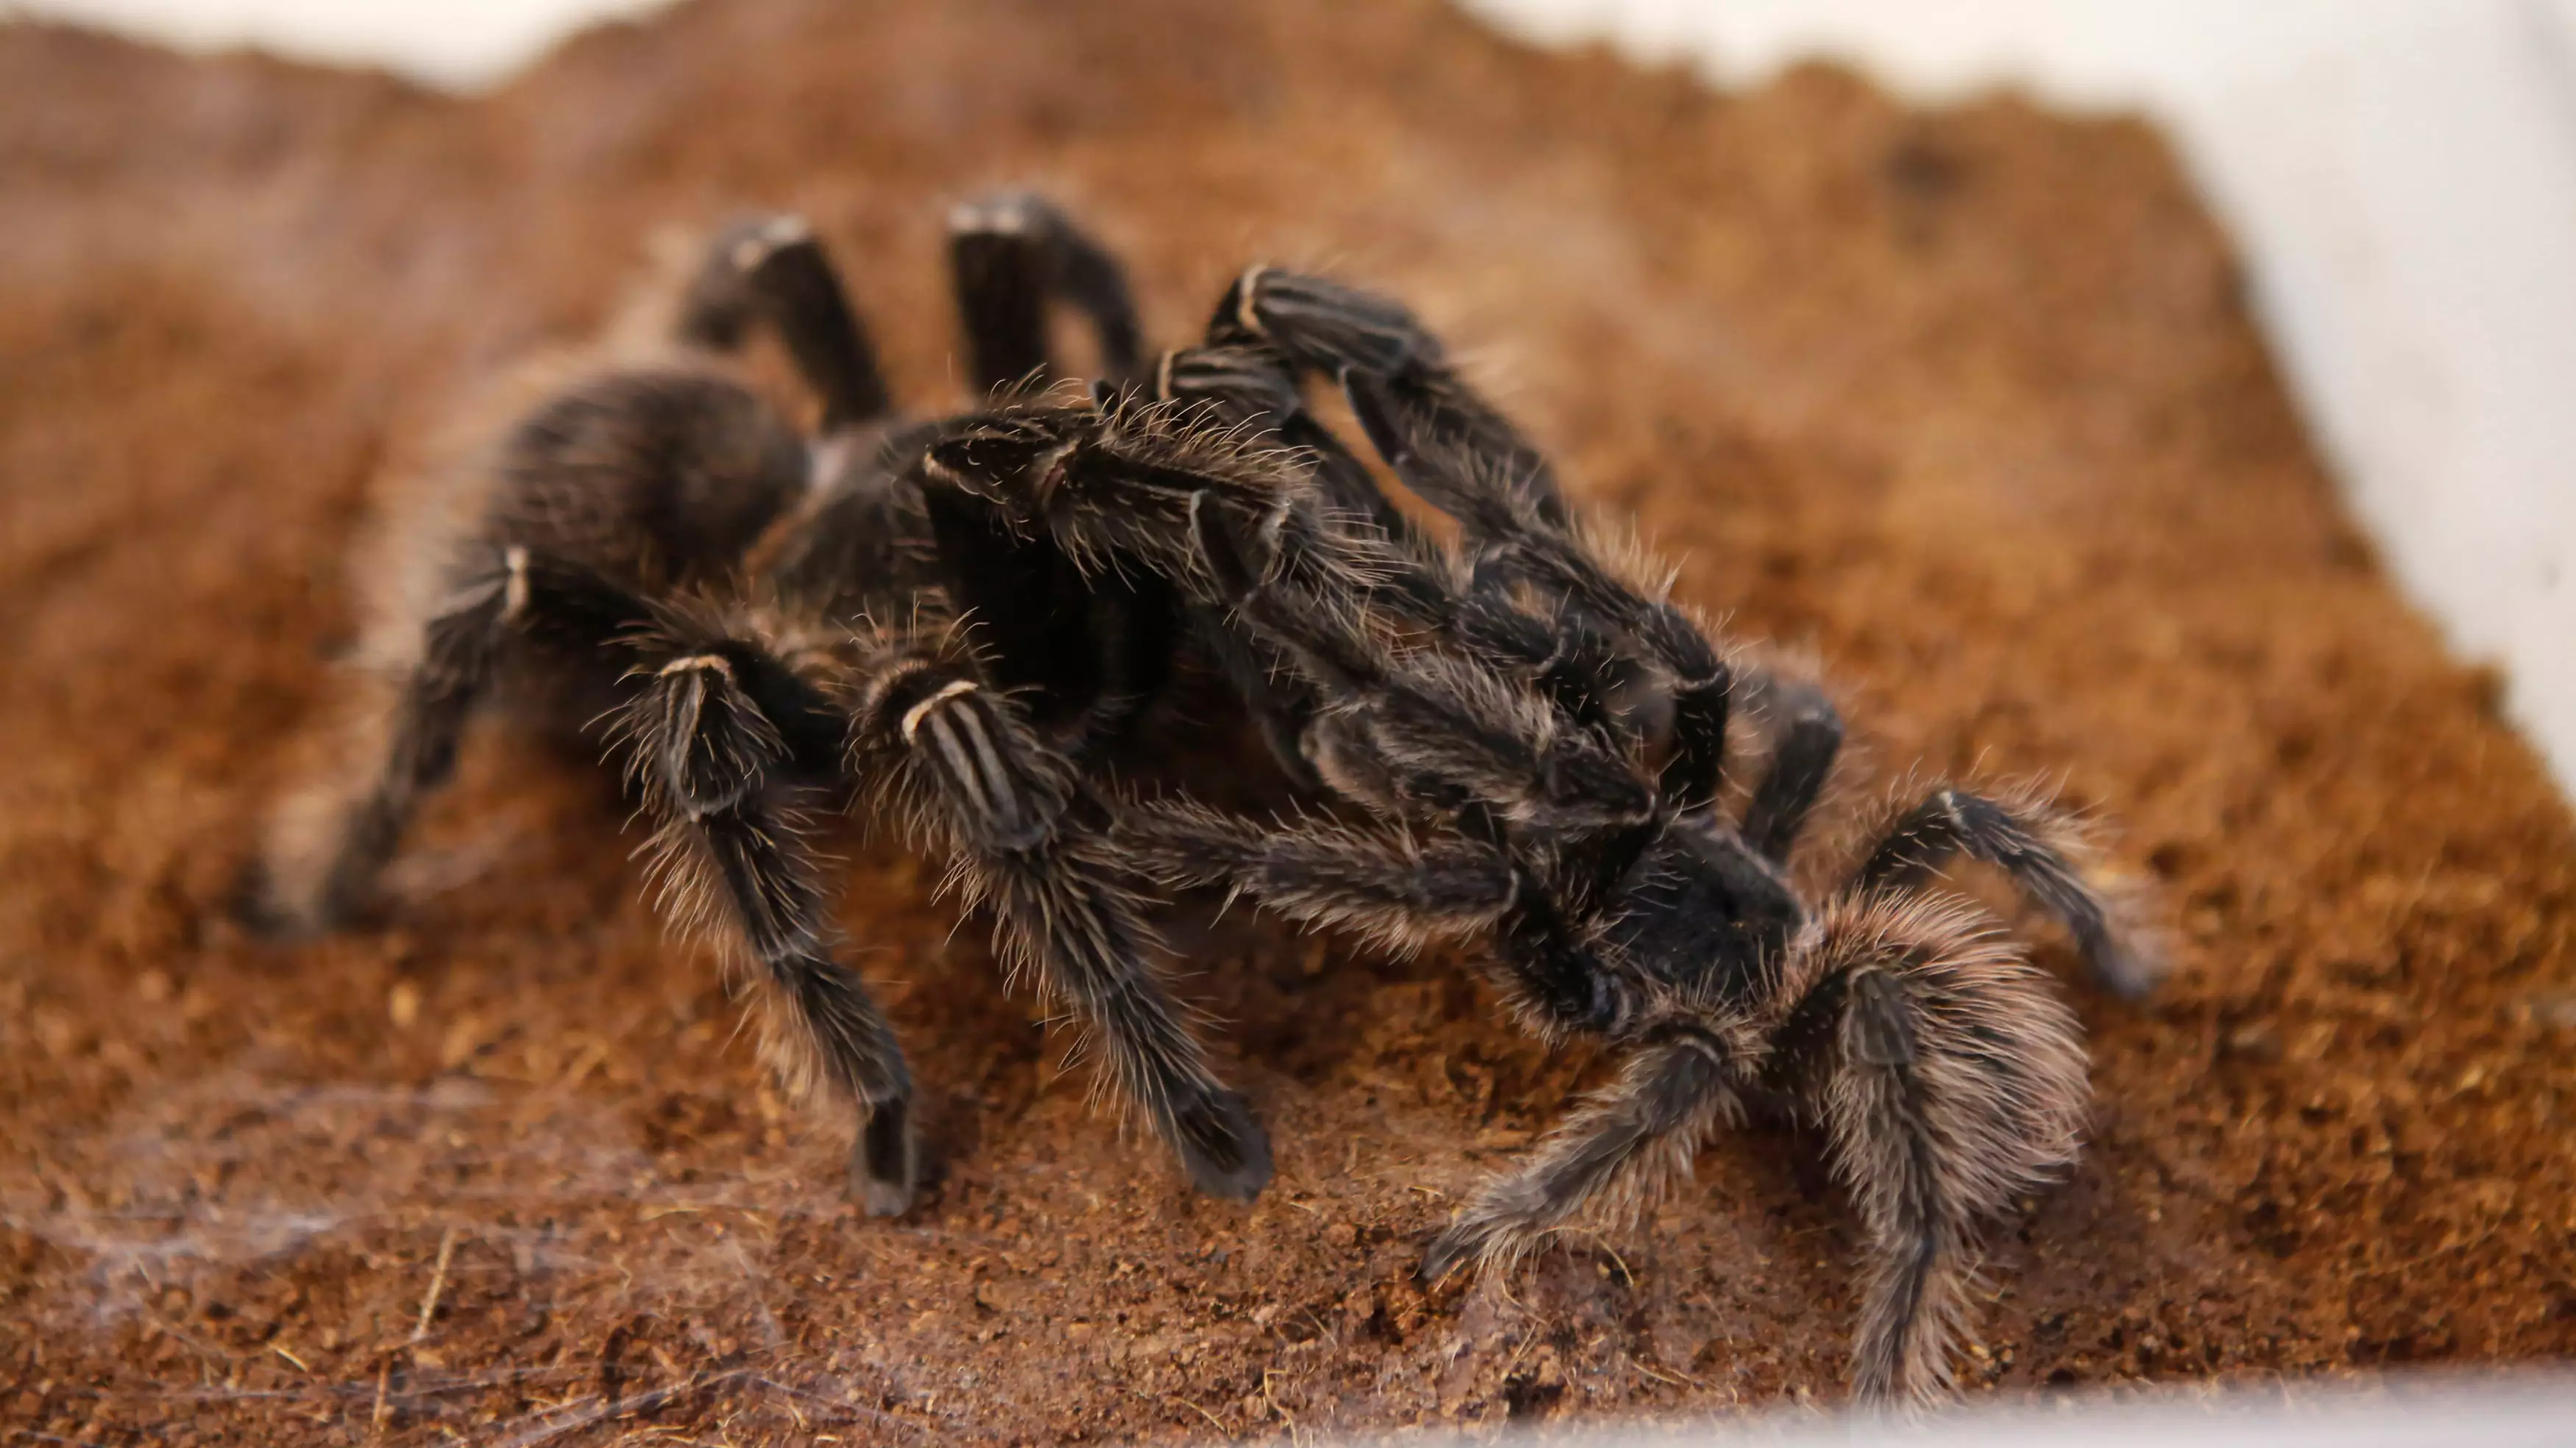 Cunning Husband Buys Tarantula To Stop 'Nagging' Mother-In-Law From Visiting